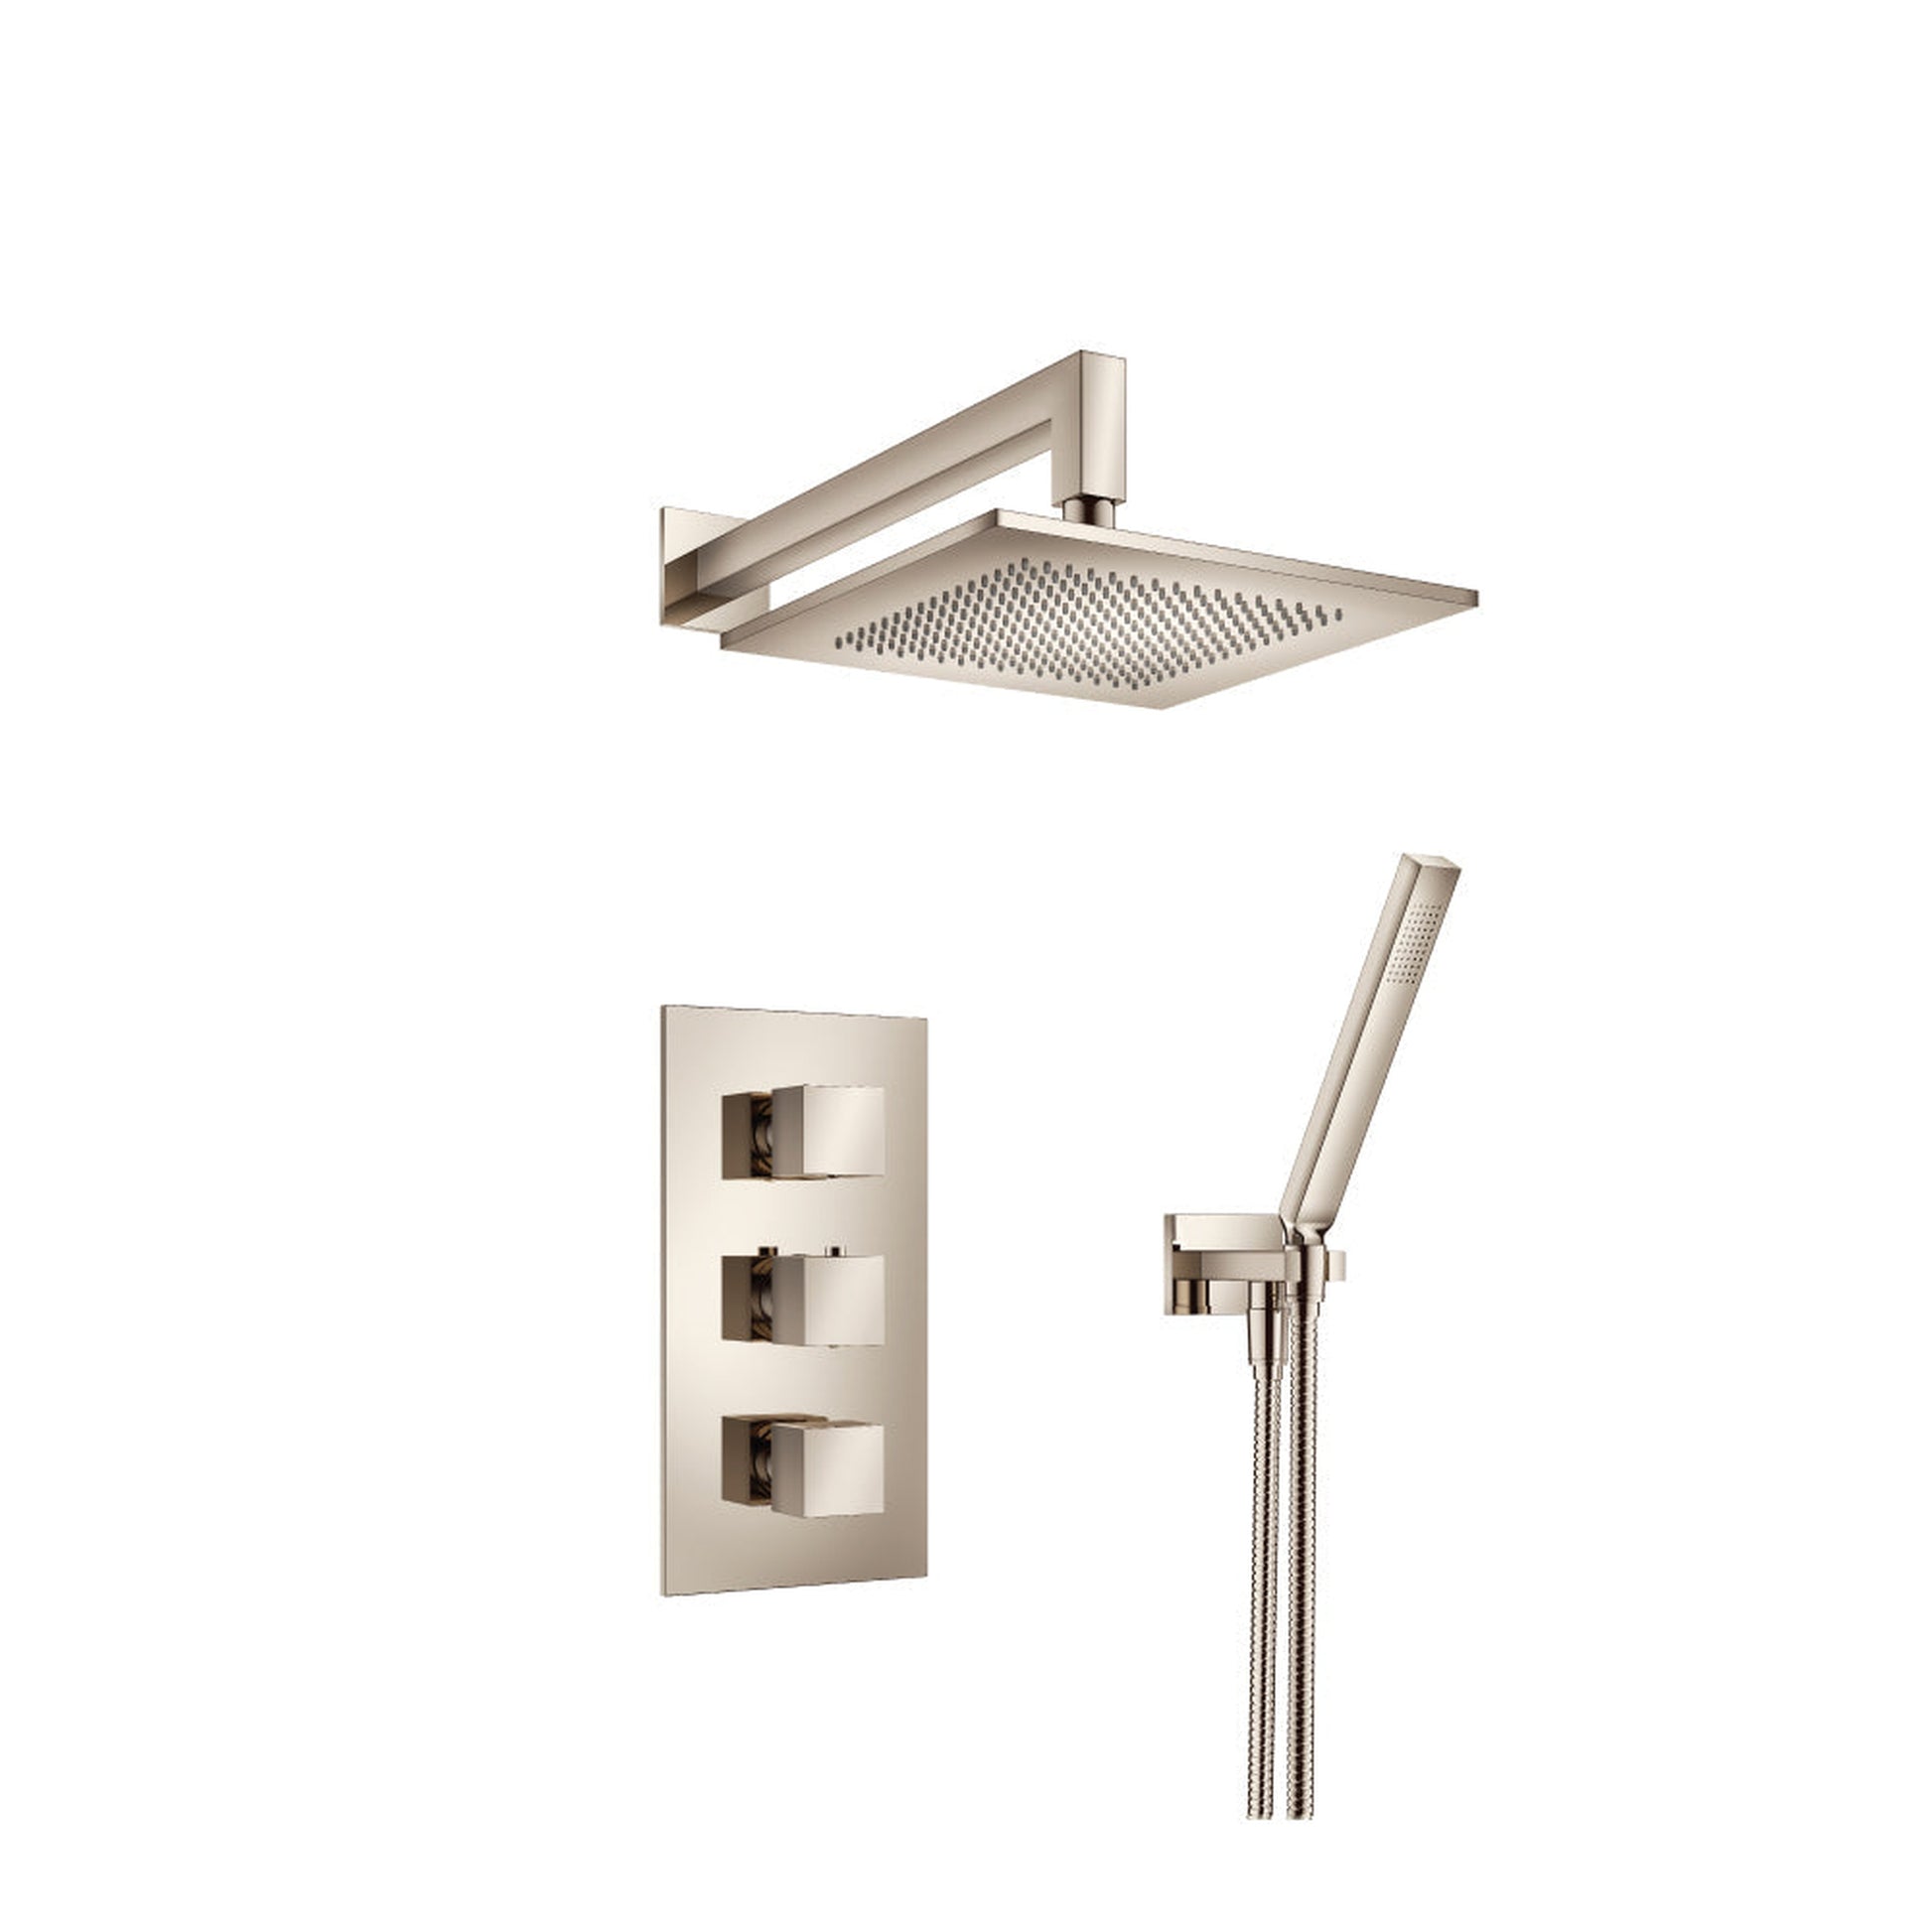 Isenberg Serie 160 Two Output Shower Set With Shower Head and Hand Held in Polished Nickel (160.7150PN)